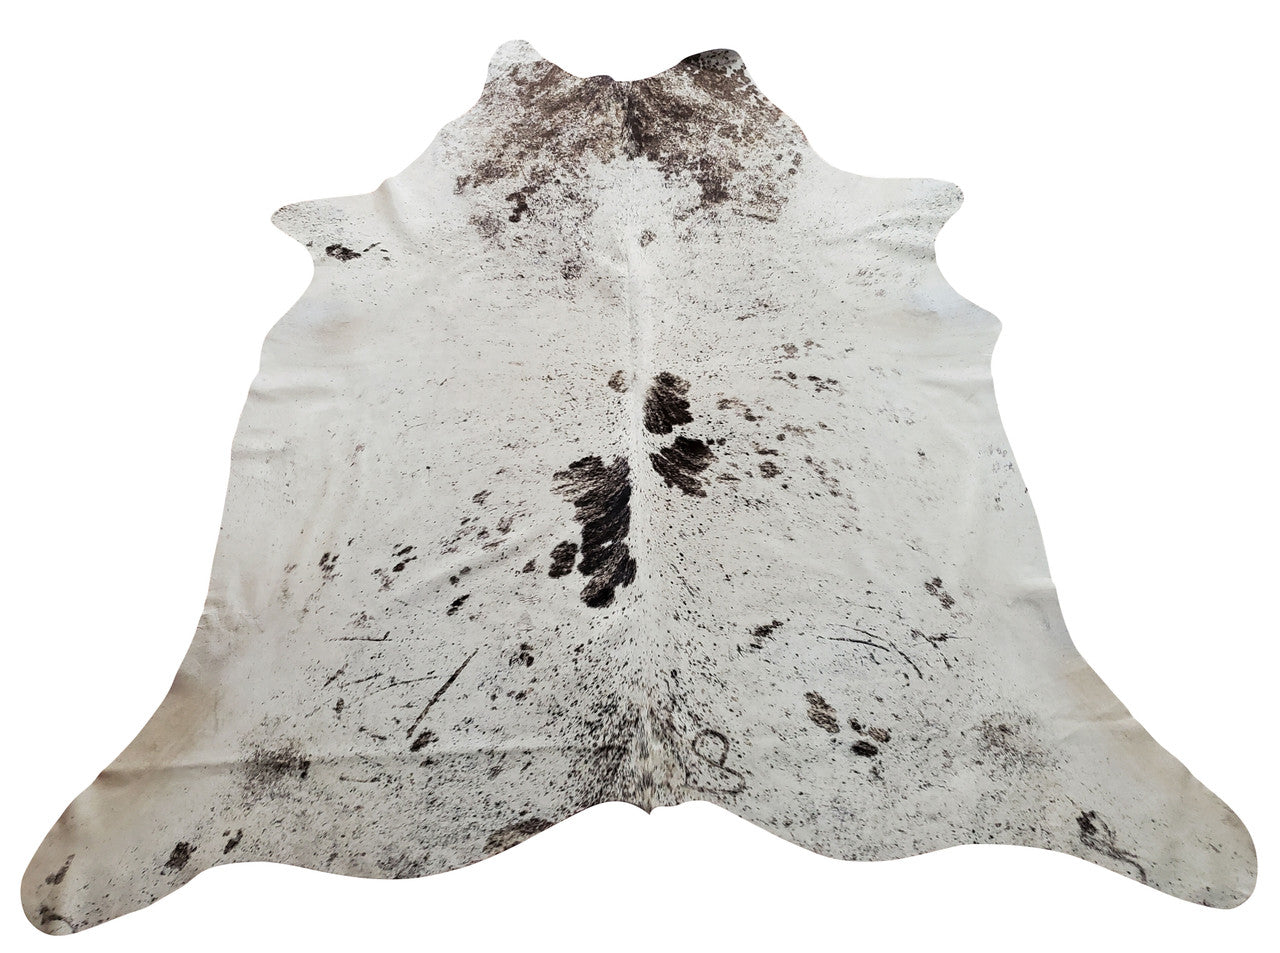 A new beautiful Brazilian cowhide rug in an exotic tricolor speckled pattern that will be center of attention, it is so pretty and unique.